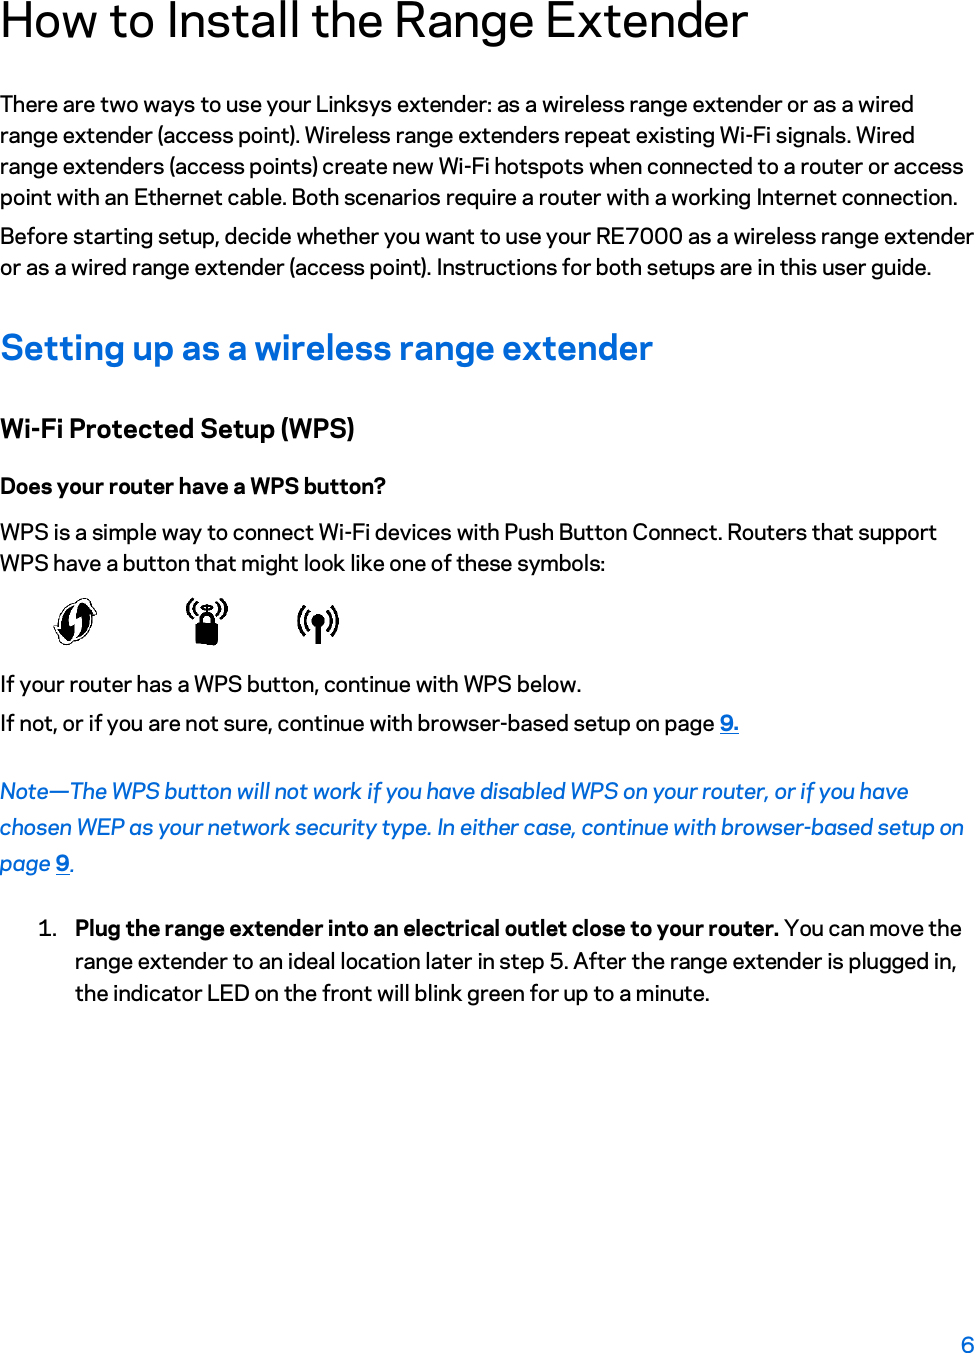 How to Install the Range Extender There are two ways to use your Linksys extender: as a wireless range extender or as a wired range extender (access point). Wireless range extenders repeat existing Wi-Fi signals. Wired range extenders (access points) create new Wi-Fi hotspots when connected to a router or access point with an Ethernet cable. Both scenarios require a router with a working Internet connection. Before starting setup, decide whether you want to use your RE7000 as a wireless range extender or as a wired range extender (access point). Instructions for both setups are in this user guide. Setting up as a wireless range extender Wi-Fi Protected Setup (WPS) Does your router have a WPS button? WPS is a simple way to connect Wi-Fi devices with Push Button Connect. Routers that support WPS have a button that might look like one of these symbols:  If your router has a WPS button, continue with WPS below. If not, or if you are not sure, continue with browser-based setup on page 9. Note—The WPS button will not work if you have disabled WPS on your router, or if you have chosen WEP as your network security type. In either case, continue with browser-based setup on page 9.  1. Plug the range extender into an electrical outlet close to your router. You can move the range extender to an ideal location later in step 5. After the range extender is plugged in, the indicator LED on the front will blink green for up to a minute. 6  